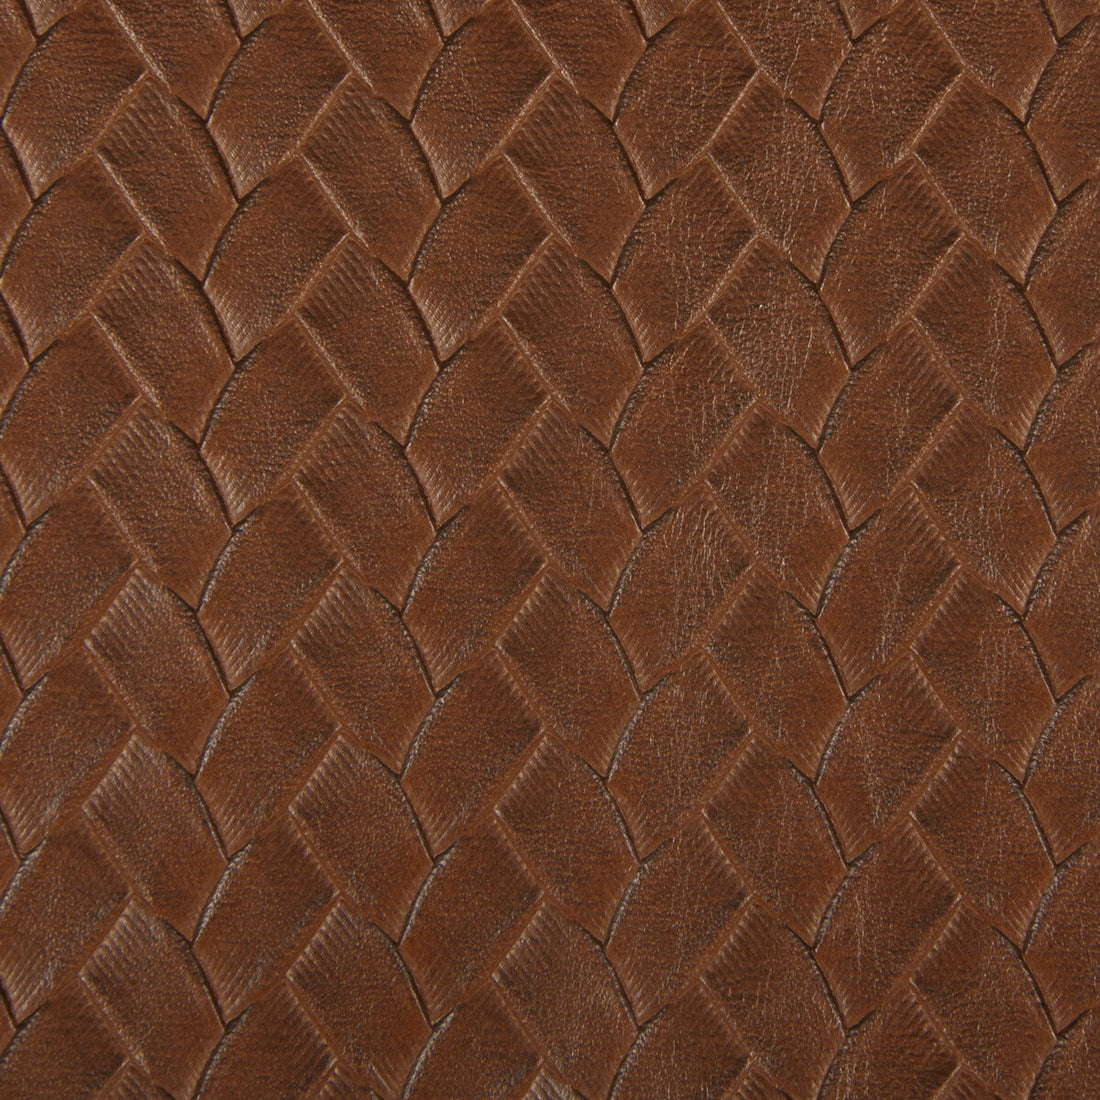 Milling fabric in chestnut color - pattern MILLING.6.0 - by Kravet Design in the Barclay Butera collection